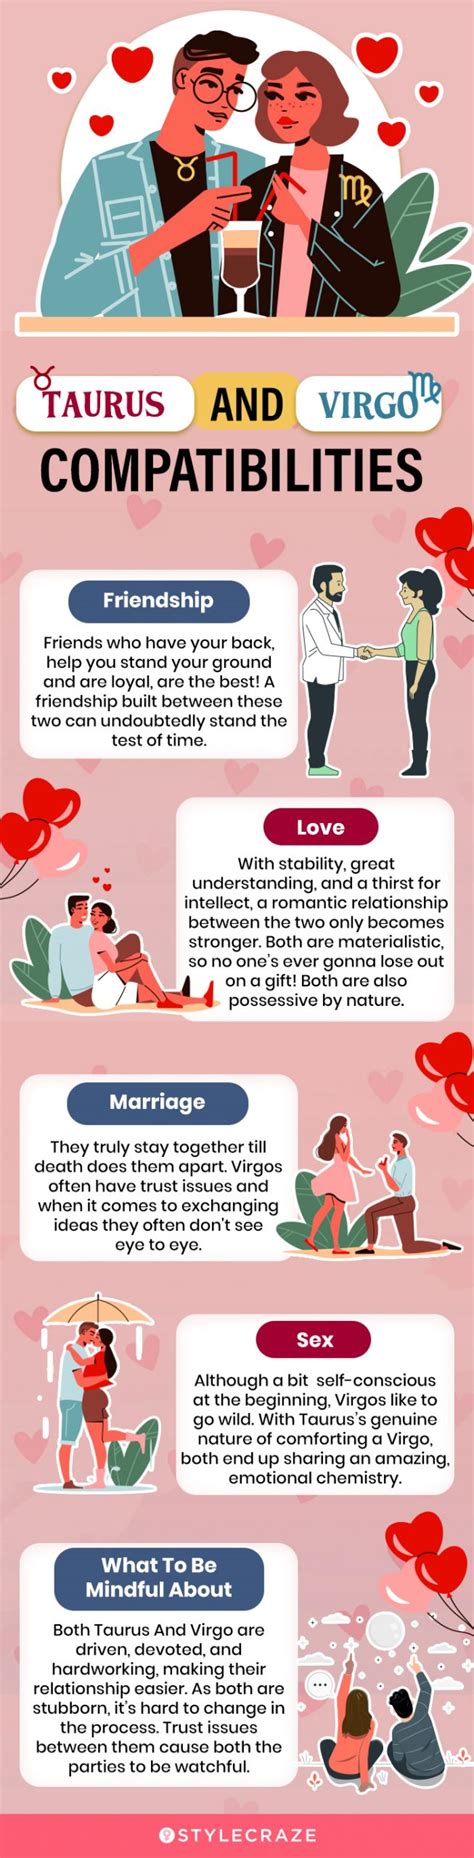 Virgo And Taurus Compatibility In Friendship Love And Sex